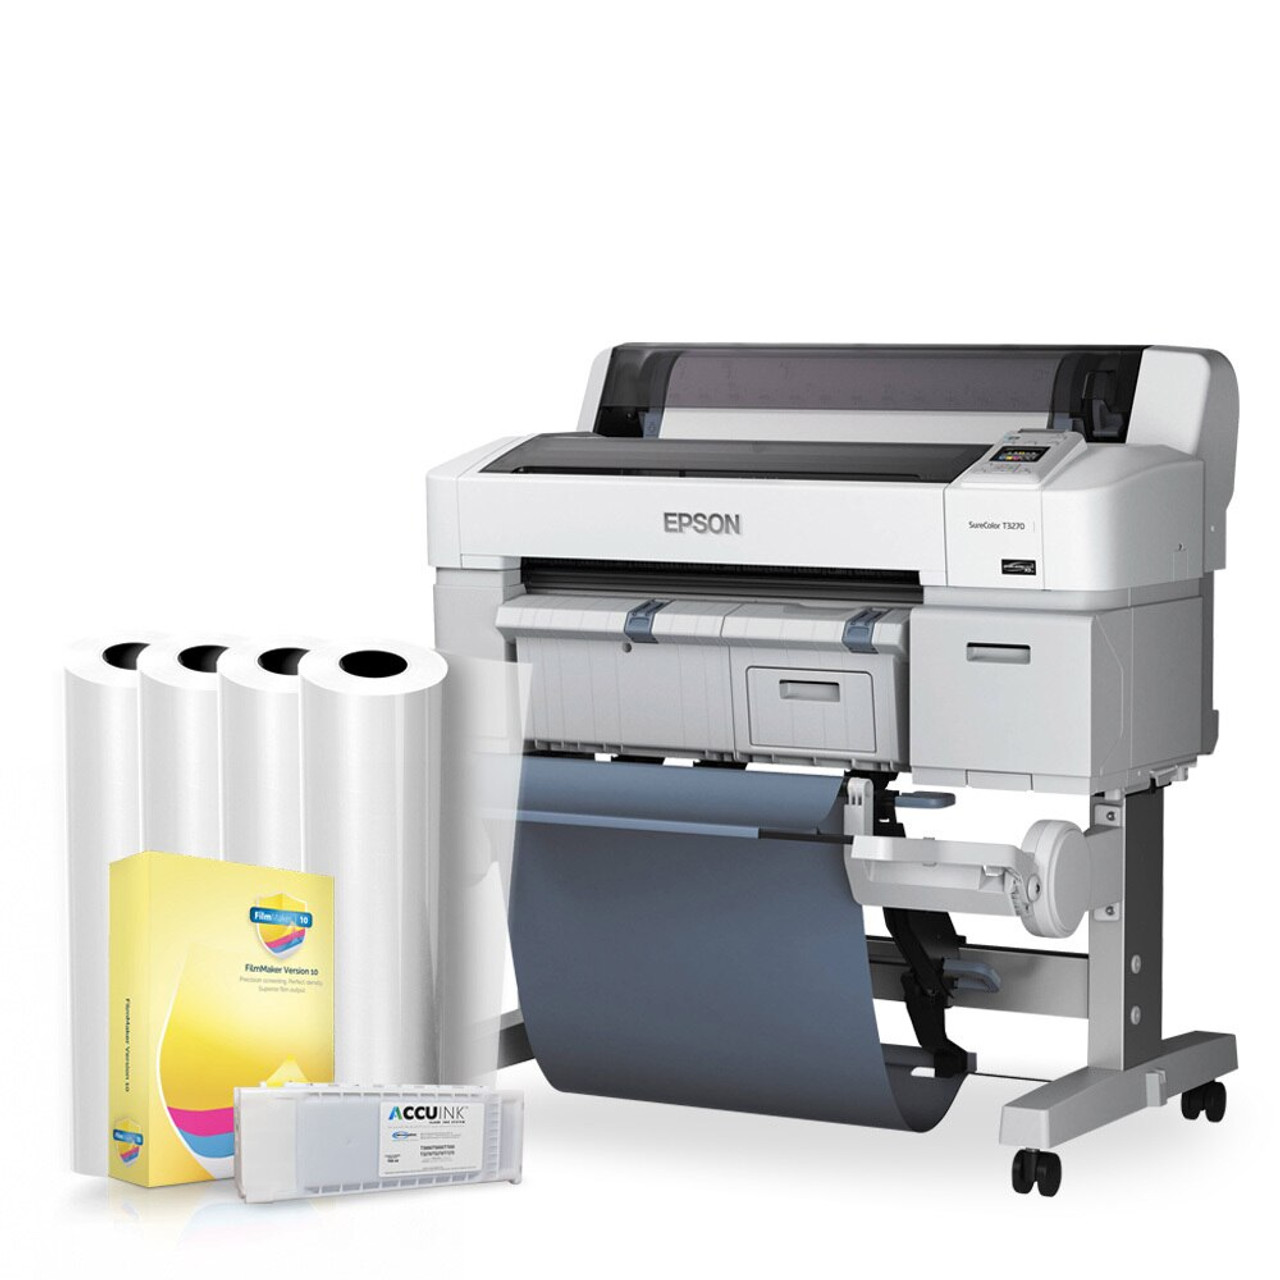 EPSON T7270 Printer Package - Screen Print Products